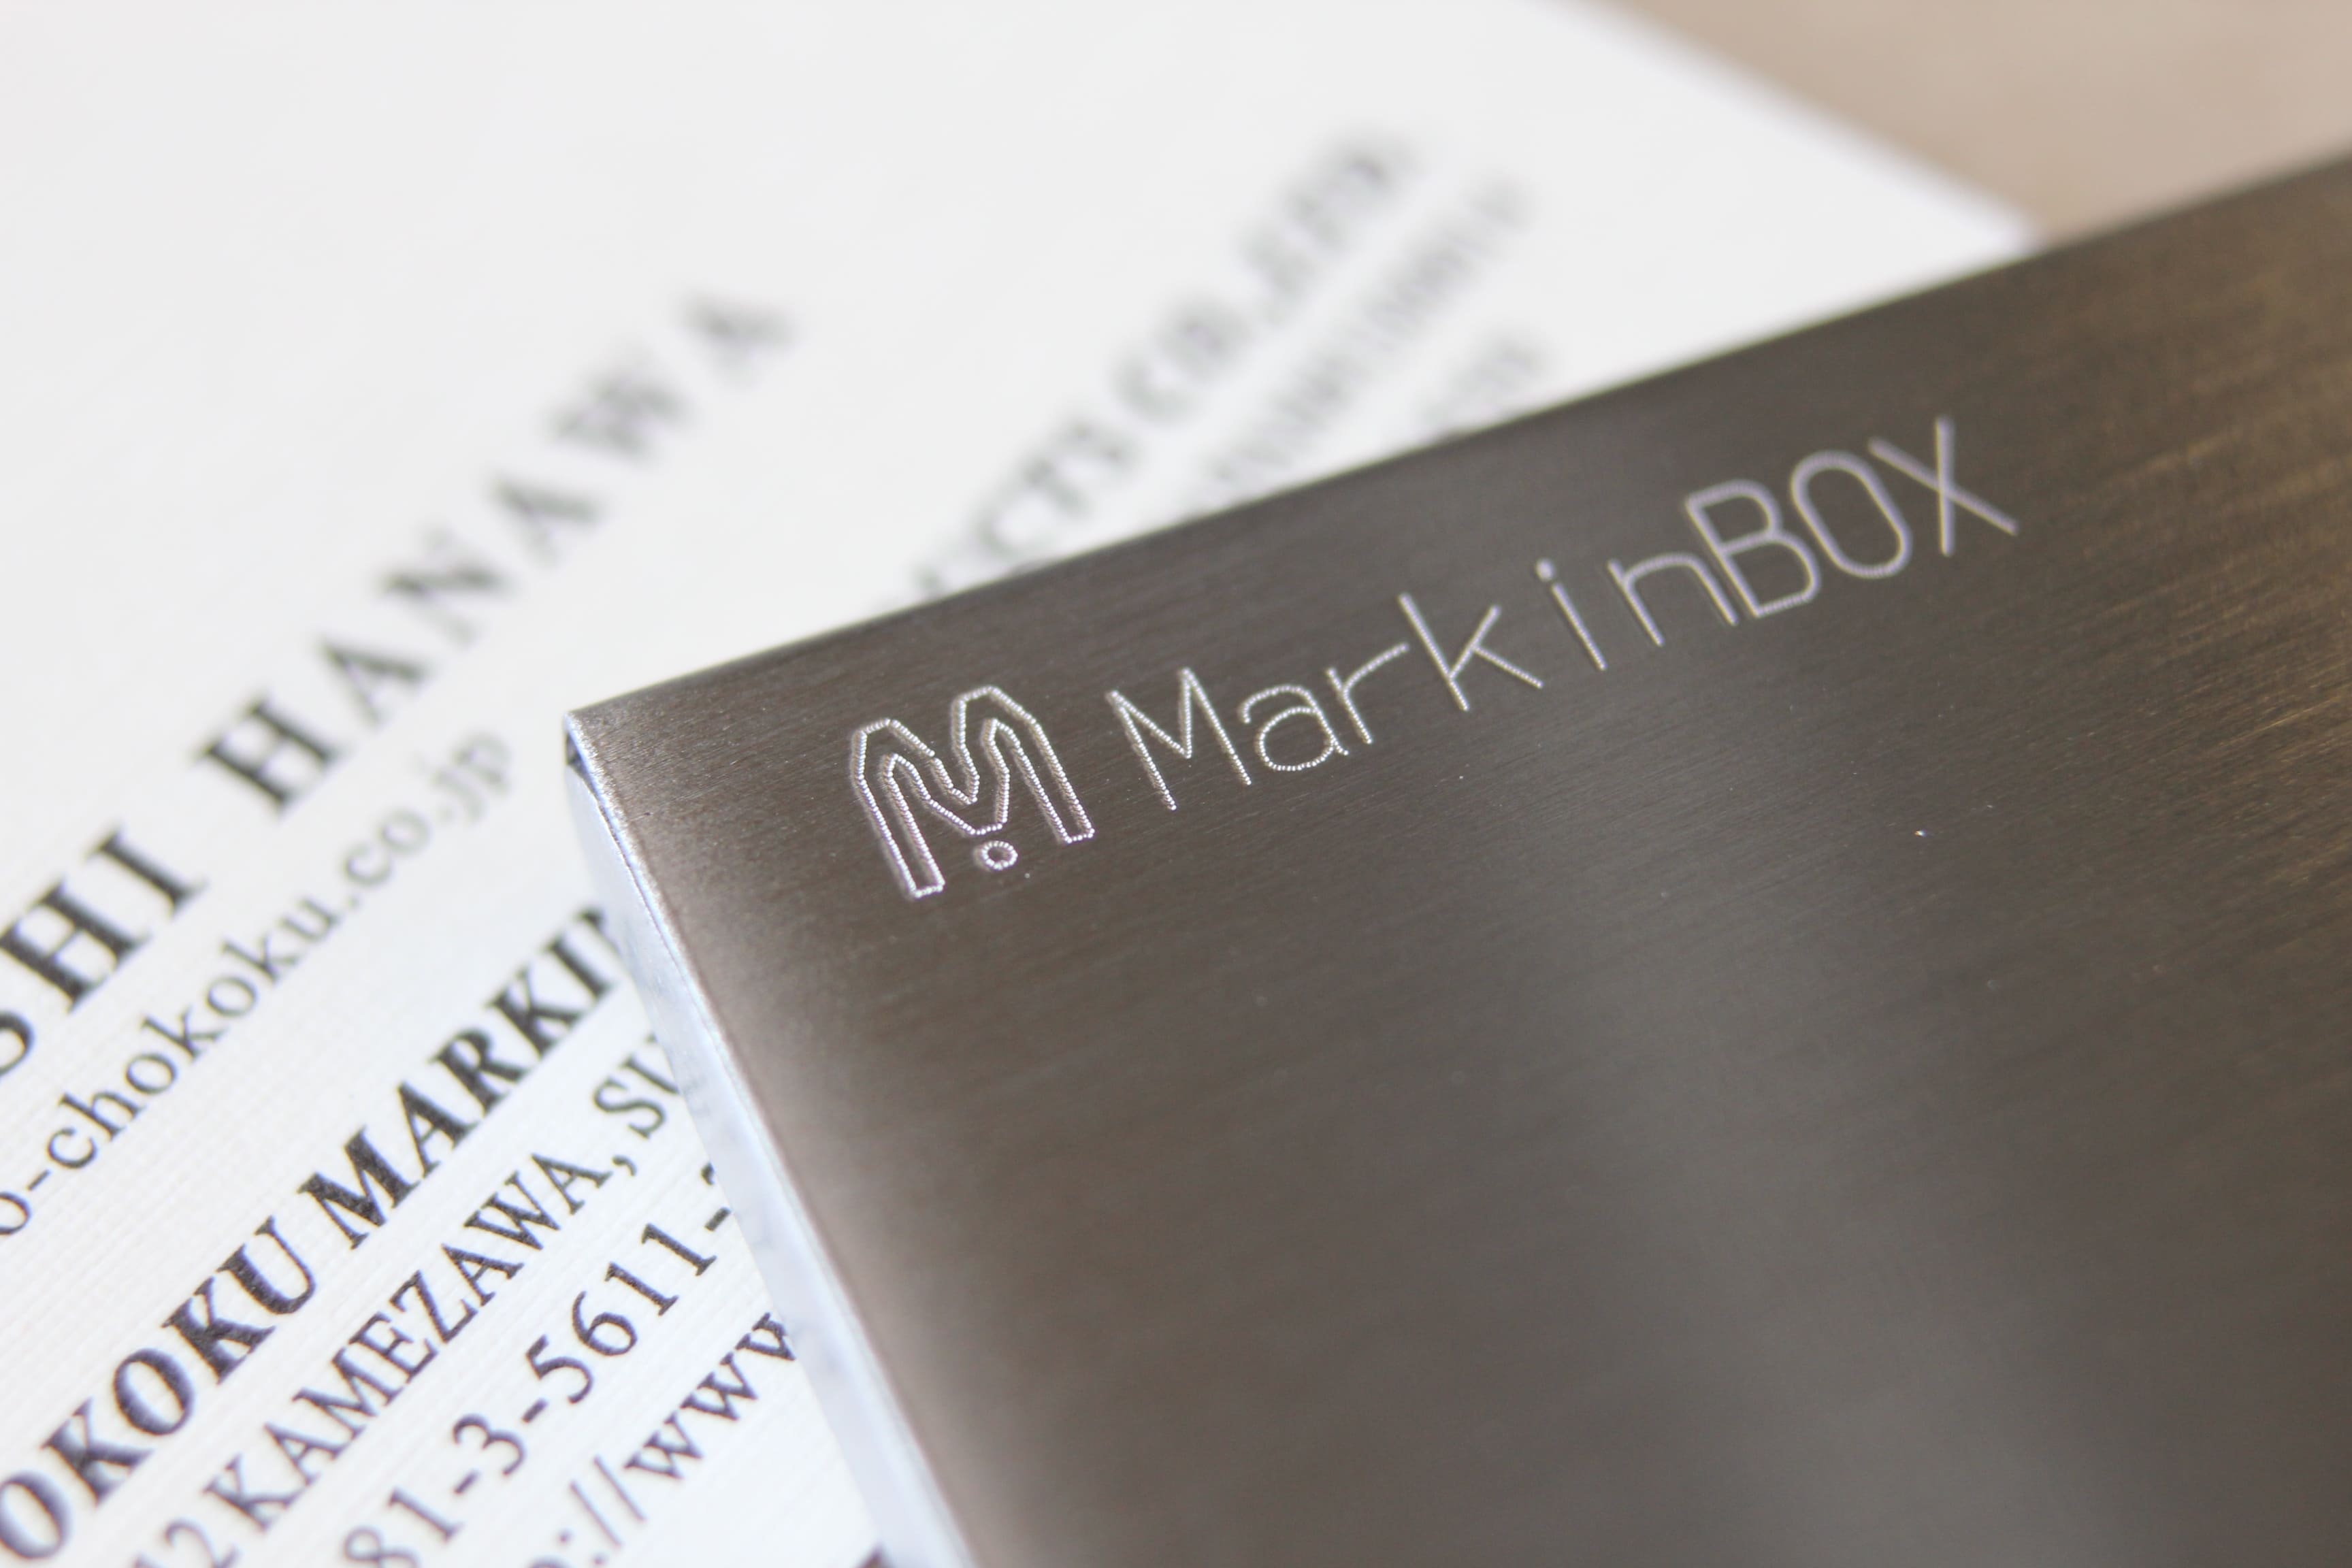 Image of stainless steel case engraved with 'MarkinBOX' and logo